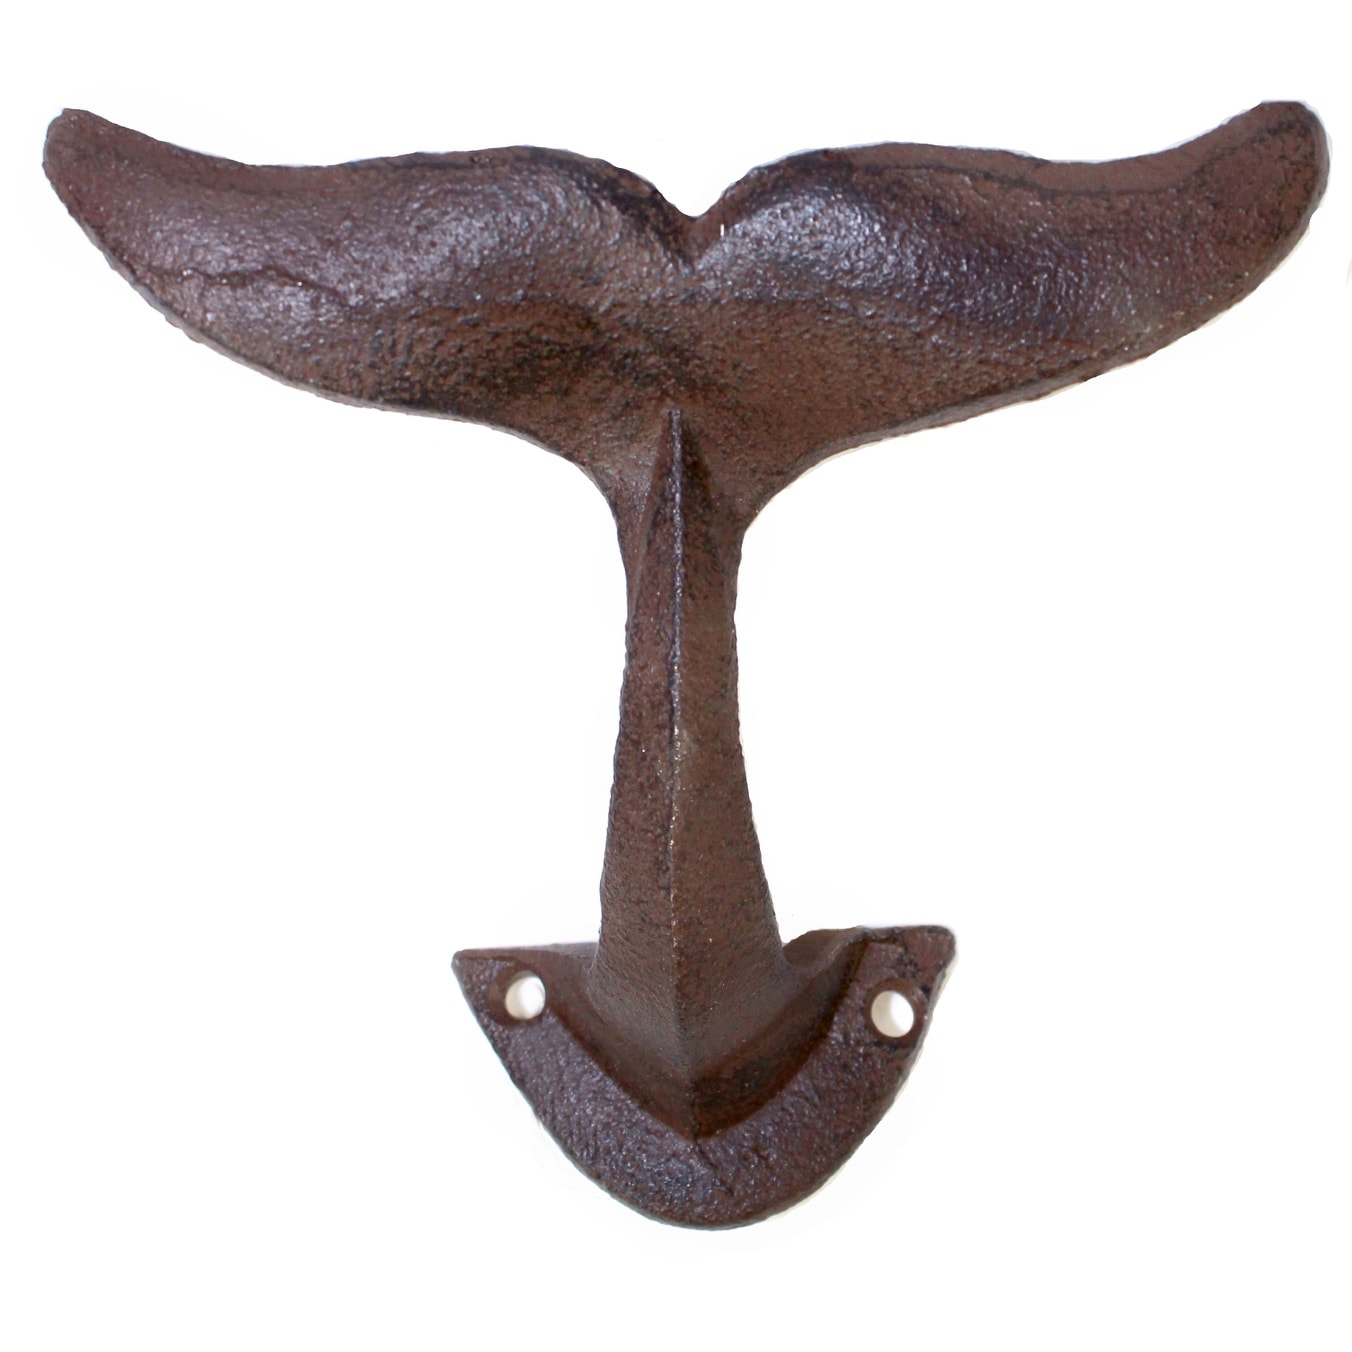 https://ak1.ostkcdn.com/images/products/is/images/direct/d2d1334c8380e36838e77c009172a23eaceef0c5/Whale-Tail-Wall-Hook-Cast-Iron-Antiqued-Brown-Finish-5-Inches.jpg